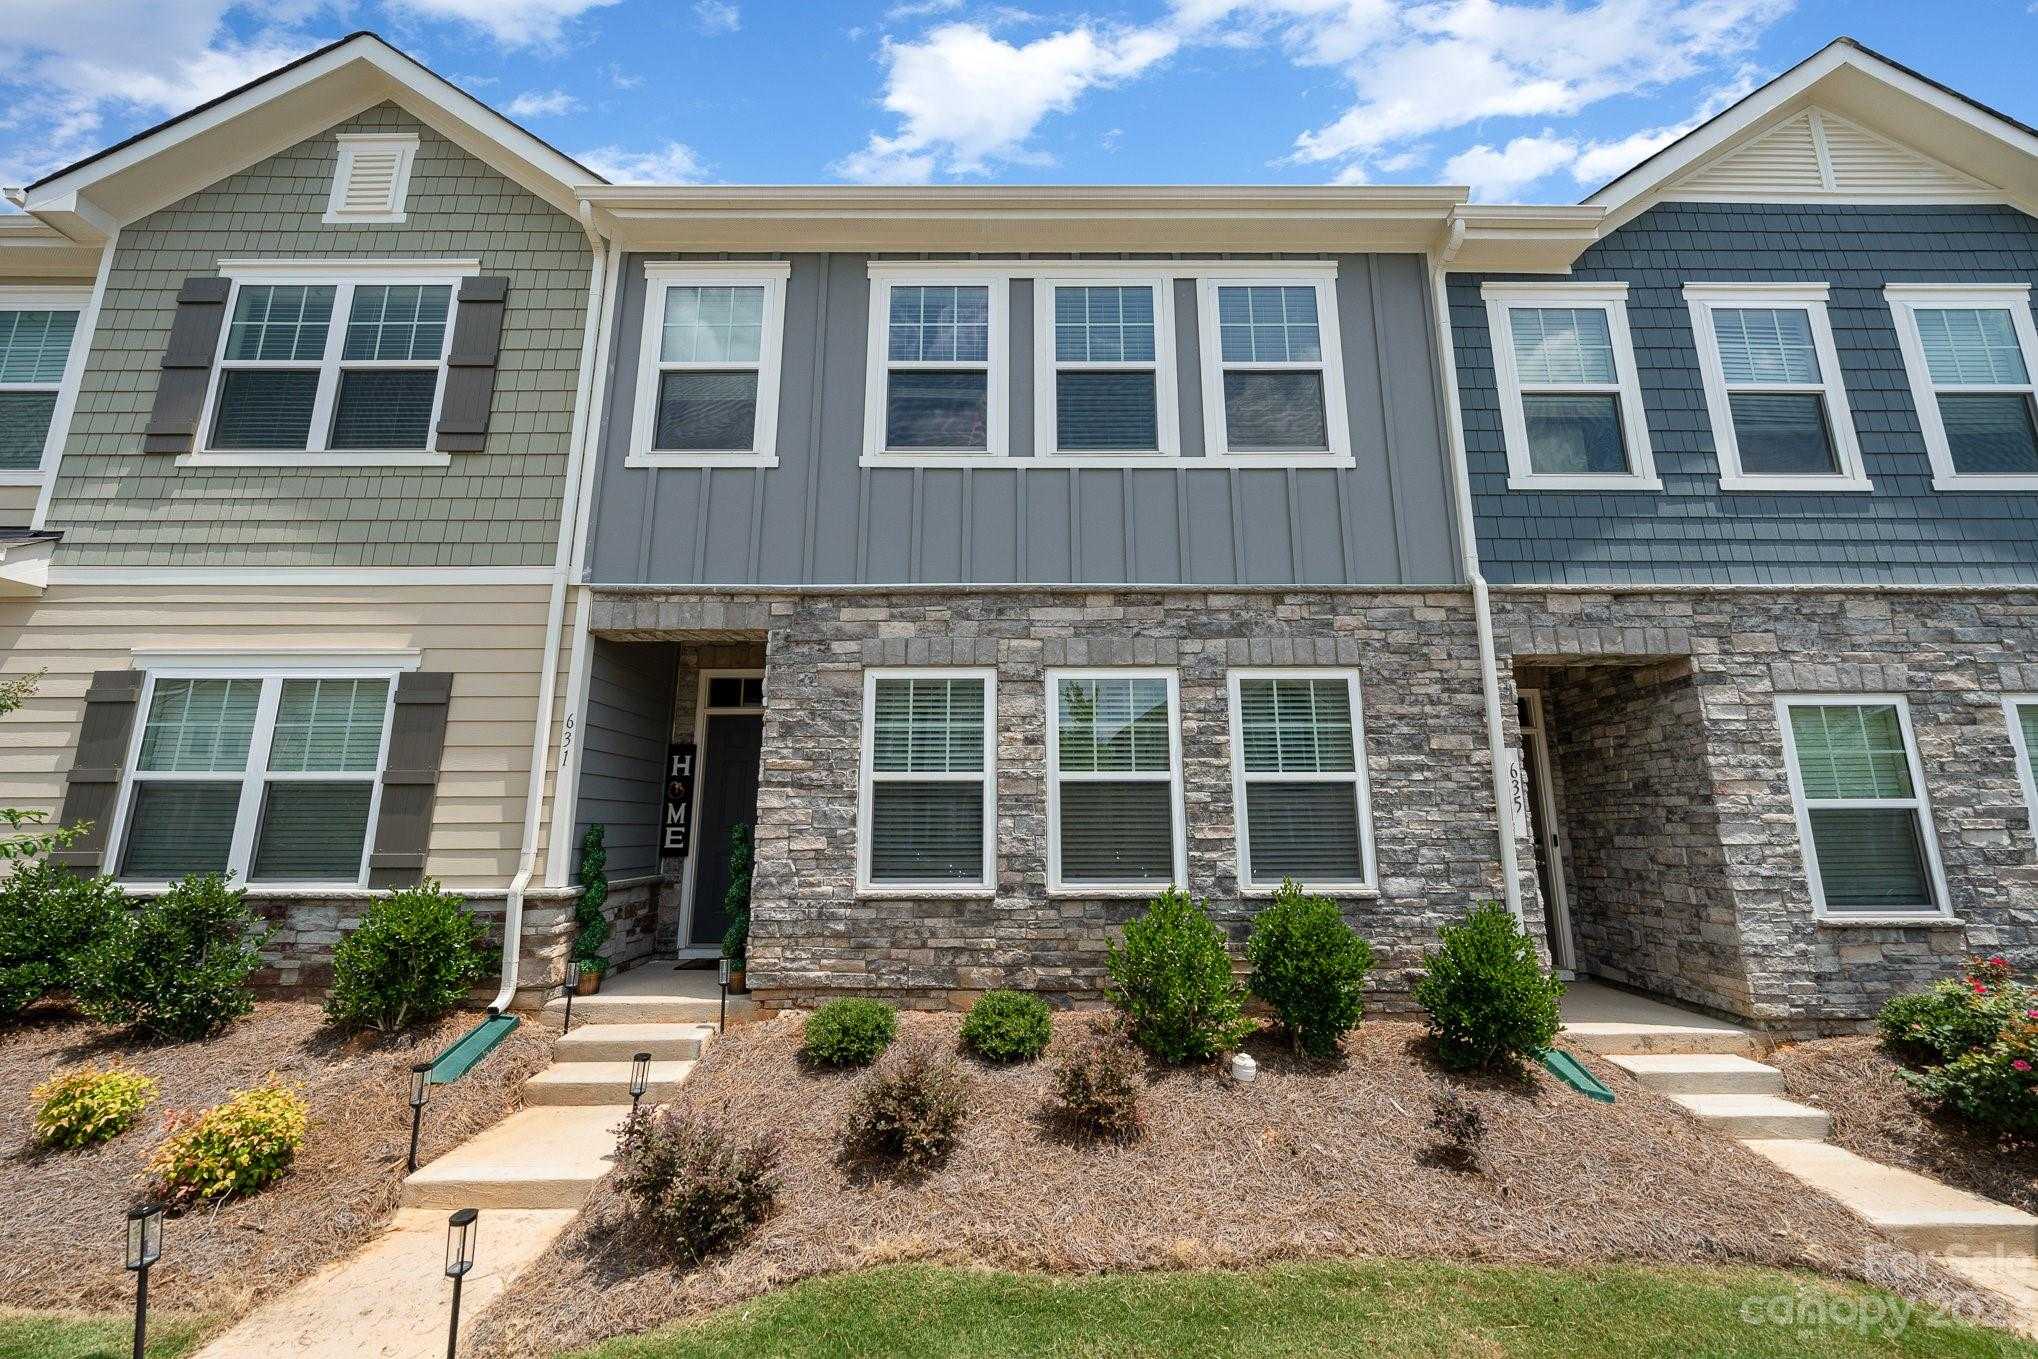 View Indian Trail, NC 28079 townhome